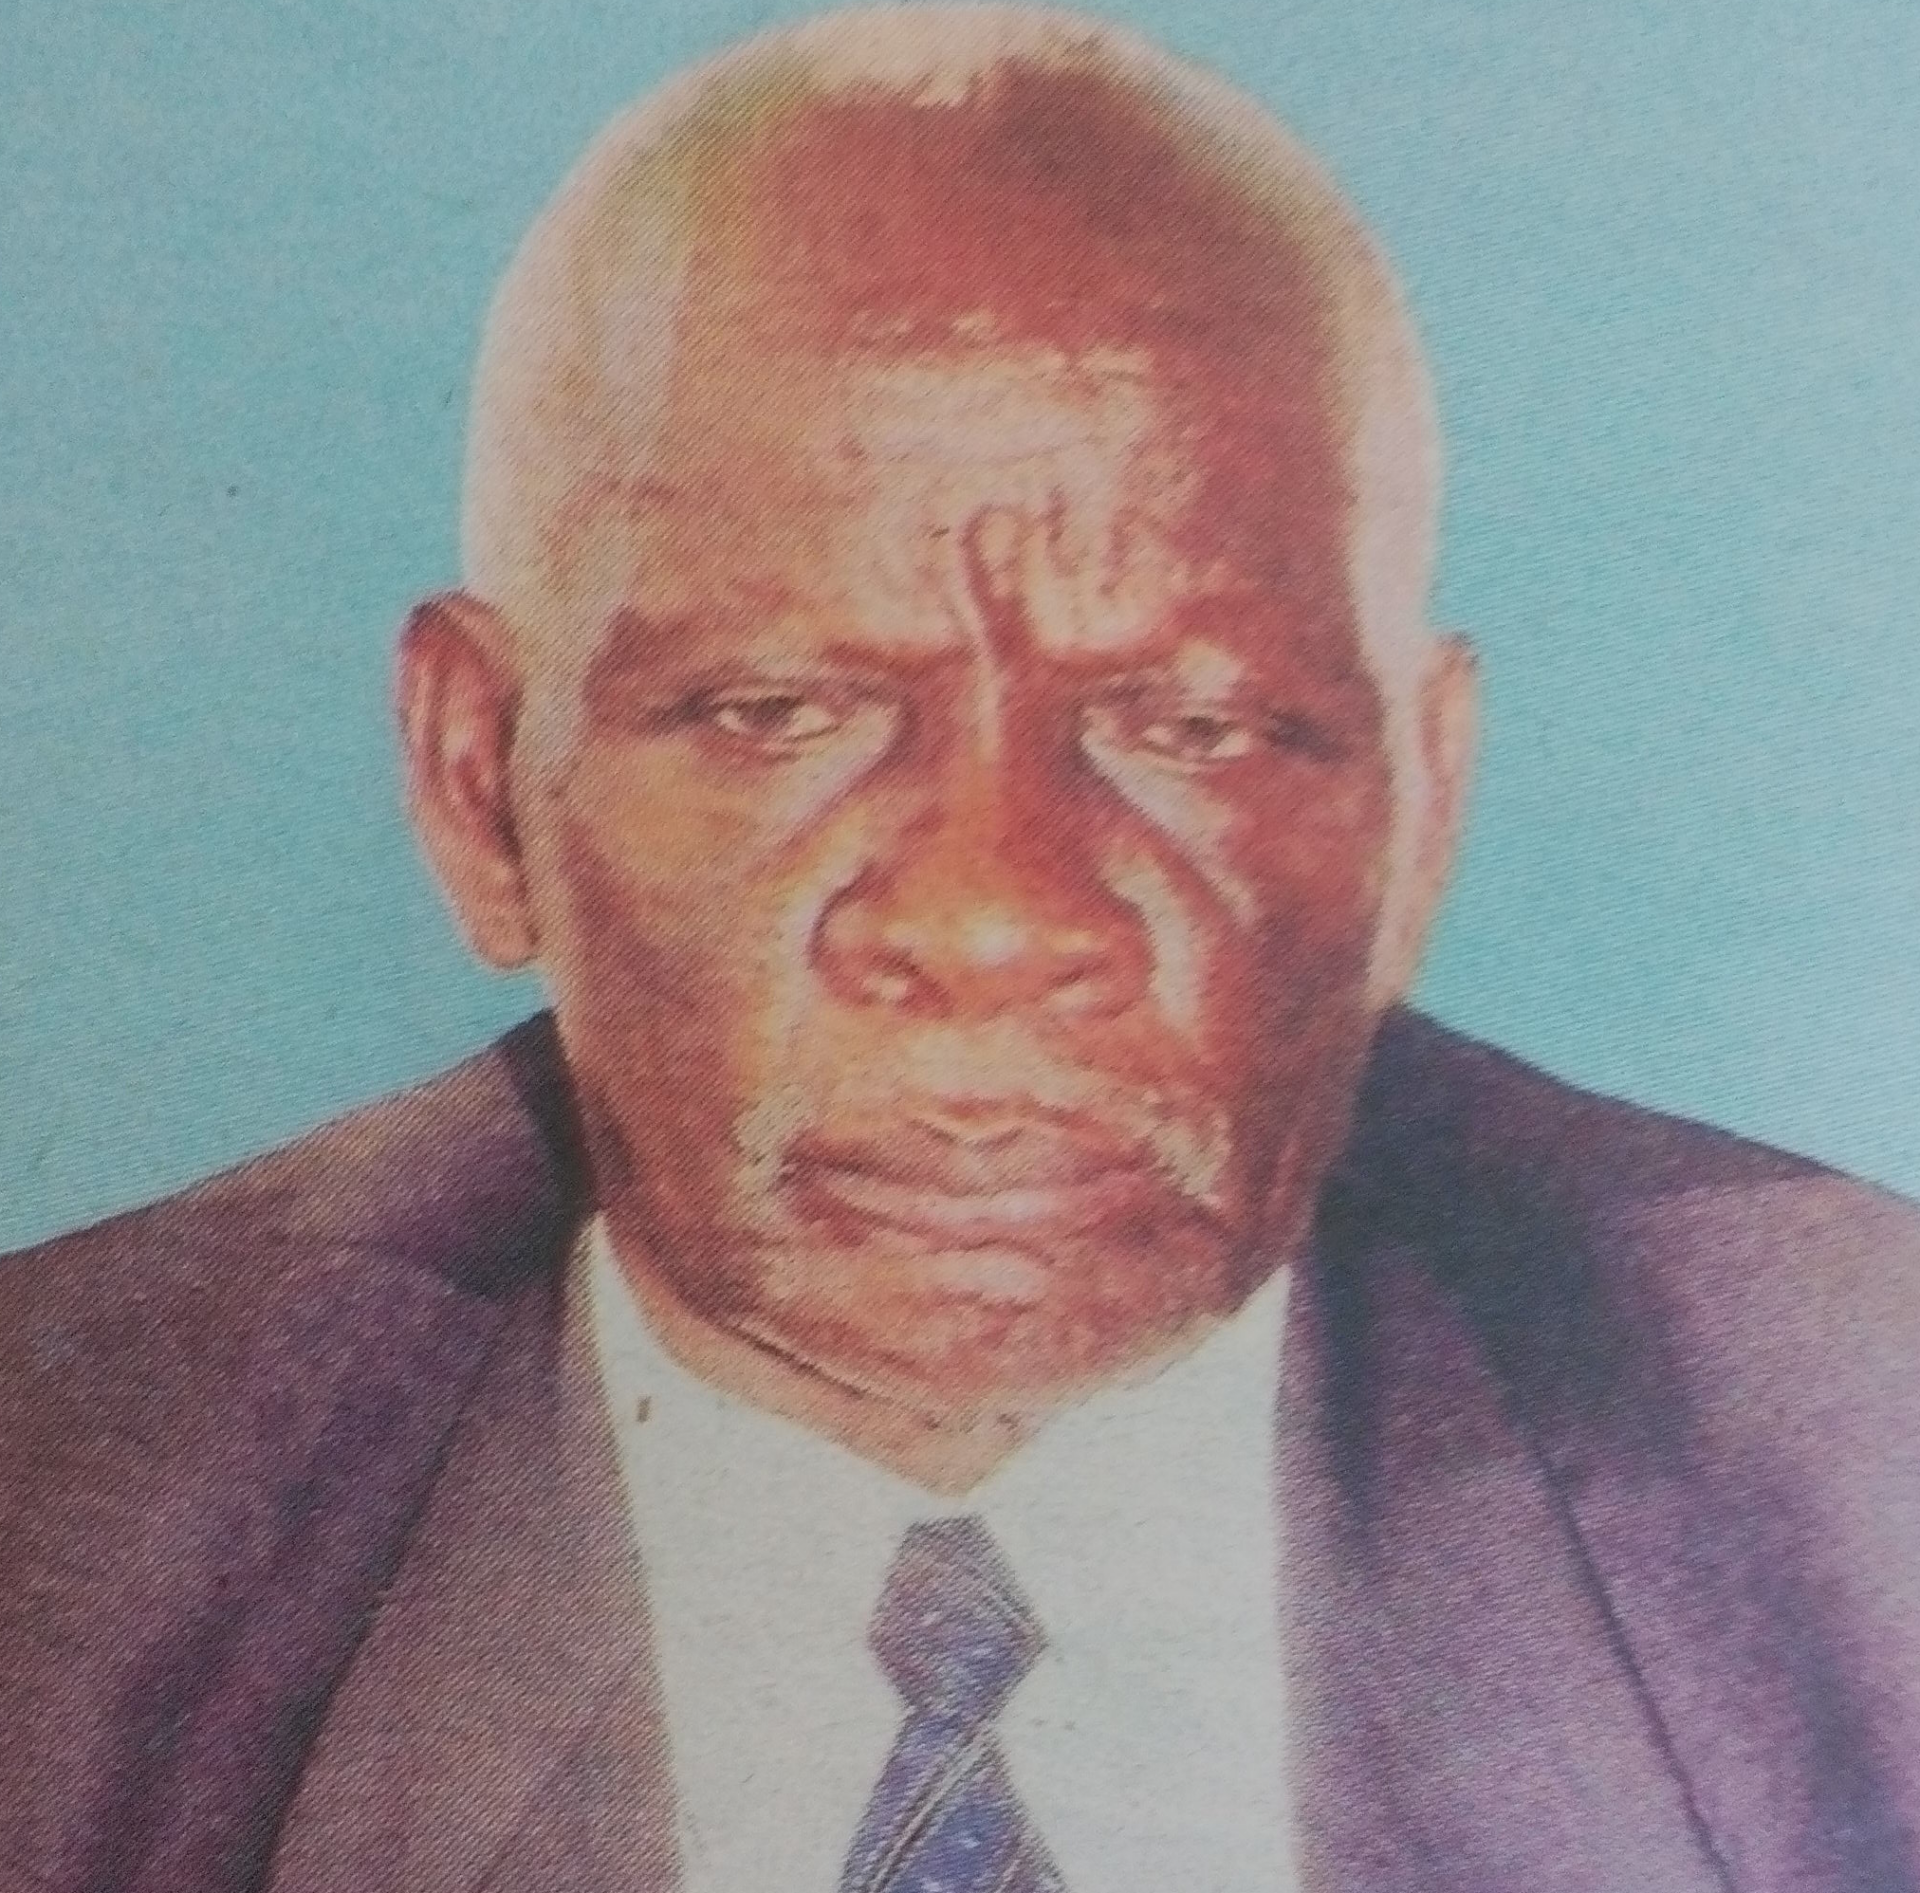 Obituary Image of Mzee Fanuel Aguko Ang'ong'a